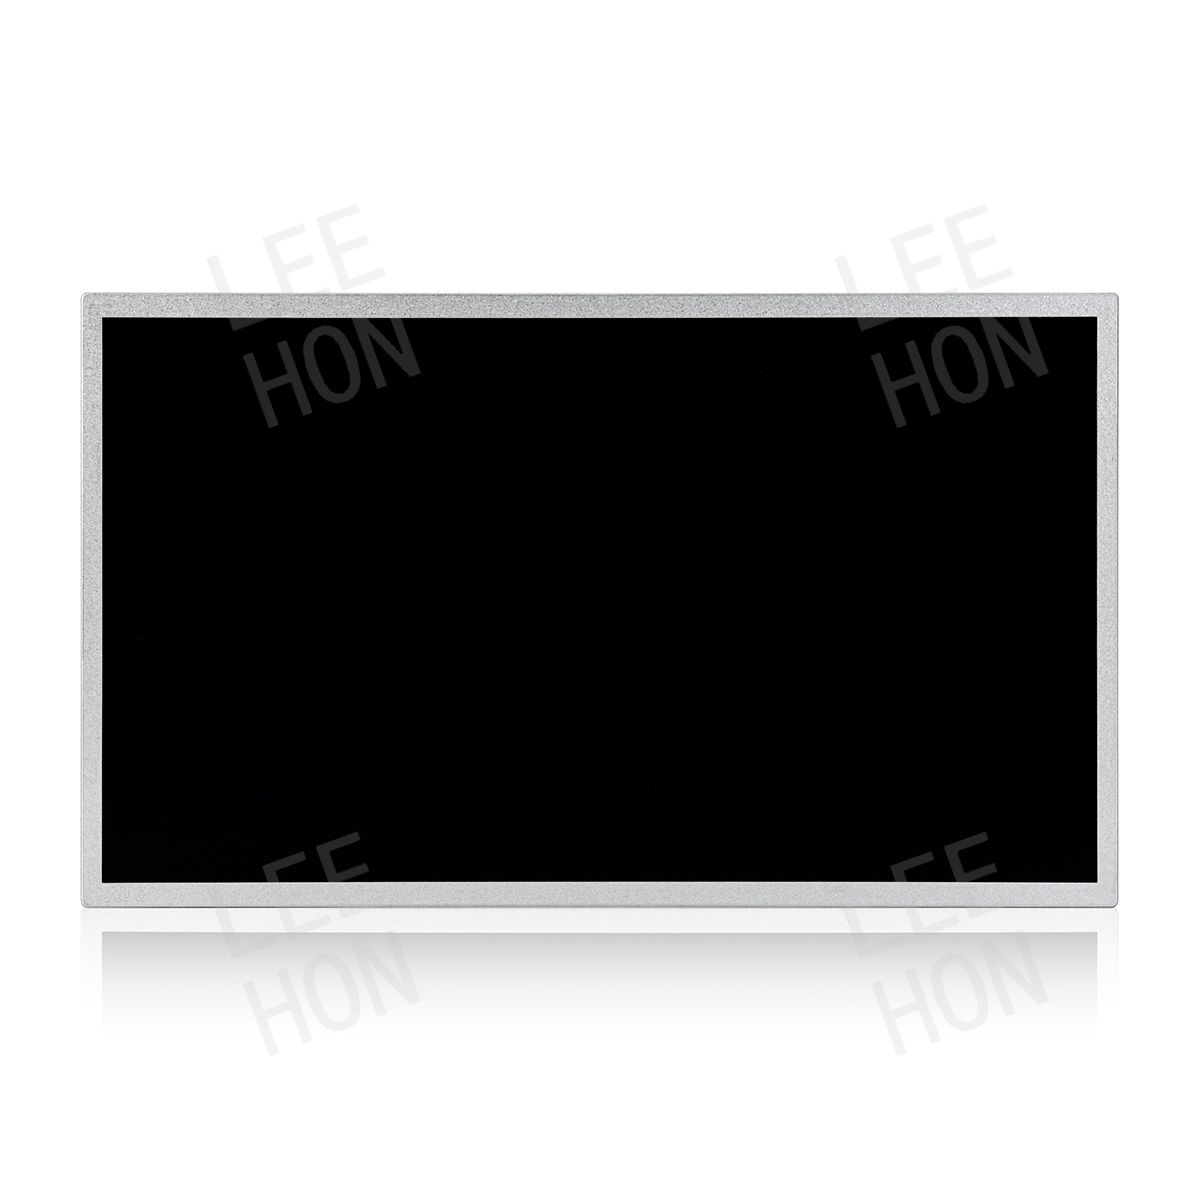 AUO 18.5 Inch 1920x1080 FHD LCD Panel TFT IPS Display For Industry G185HAN01.1 500nits and 30 pins LV